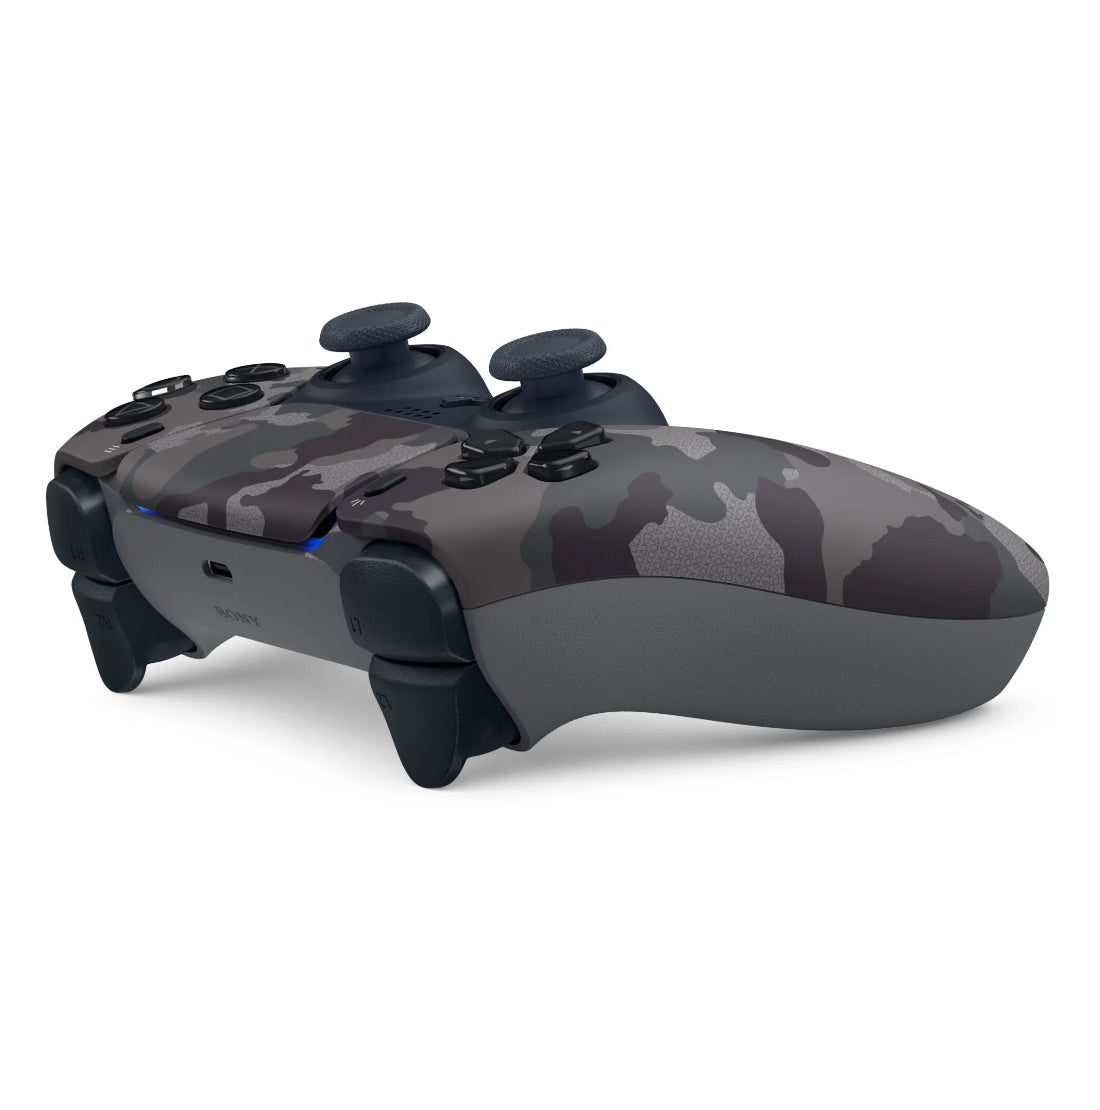 Sony Playstation 5 Disc Edition with Extra Gray Camo Controller and Play and Charge Kit Bundle - Pro-Distributing